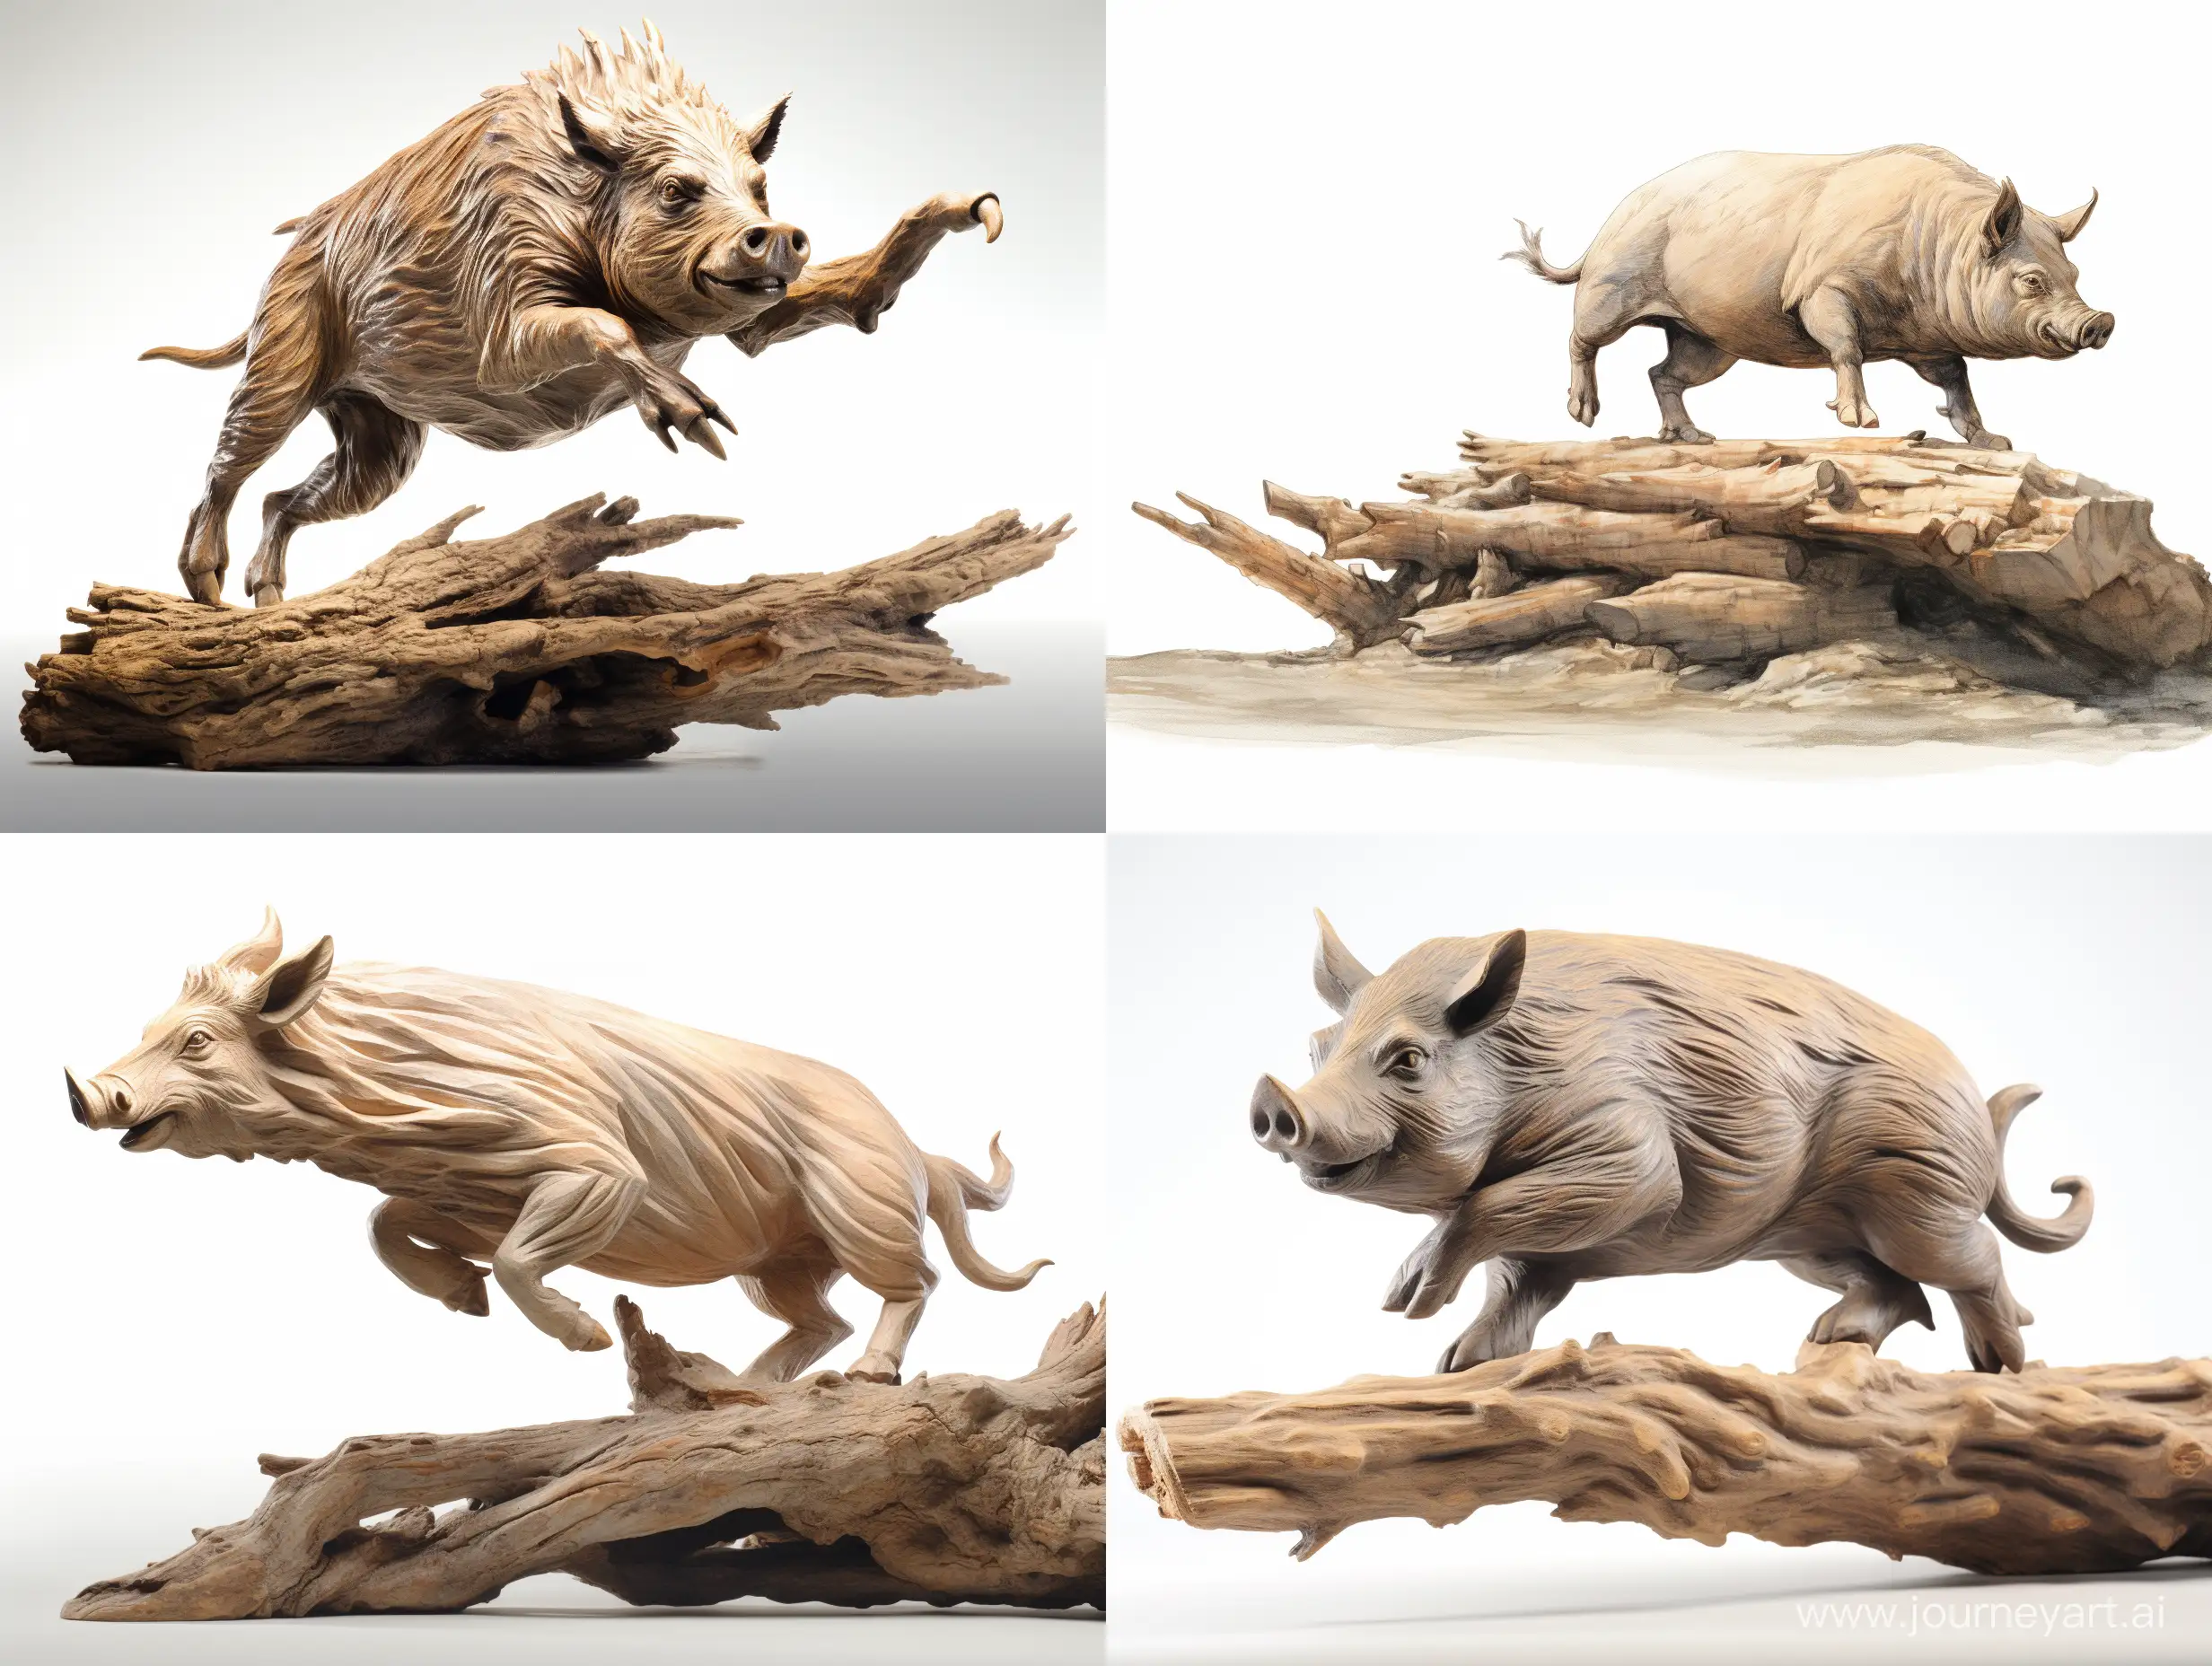 Dynamic-Wooden-Boar-Sculpture-Leaping-in-Battle-Pose-Ultra-Realistic-3D-Carving